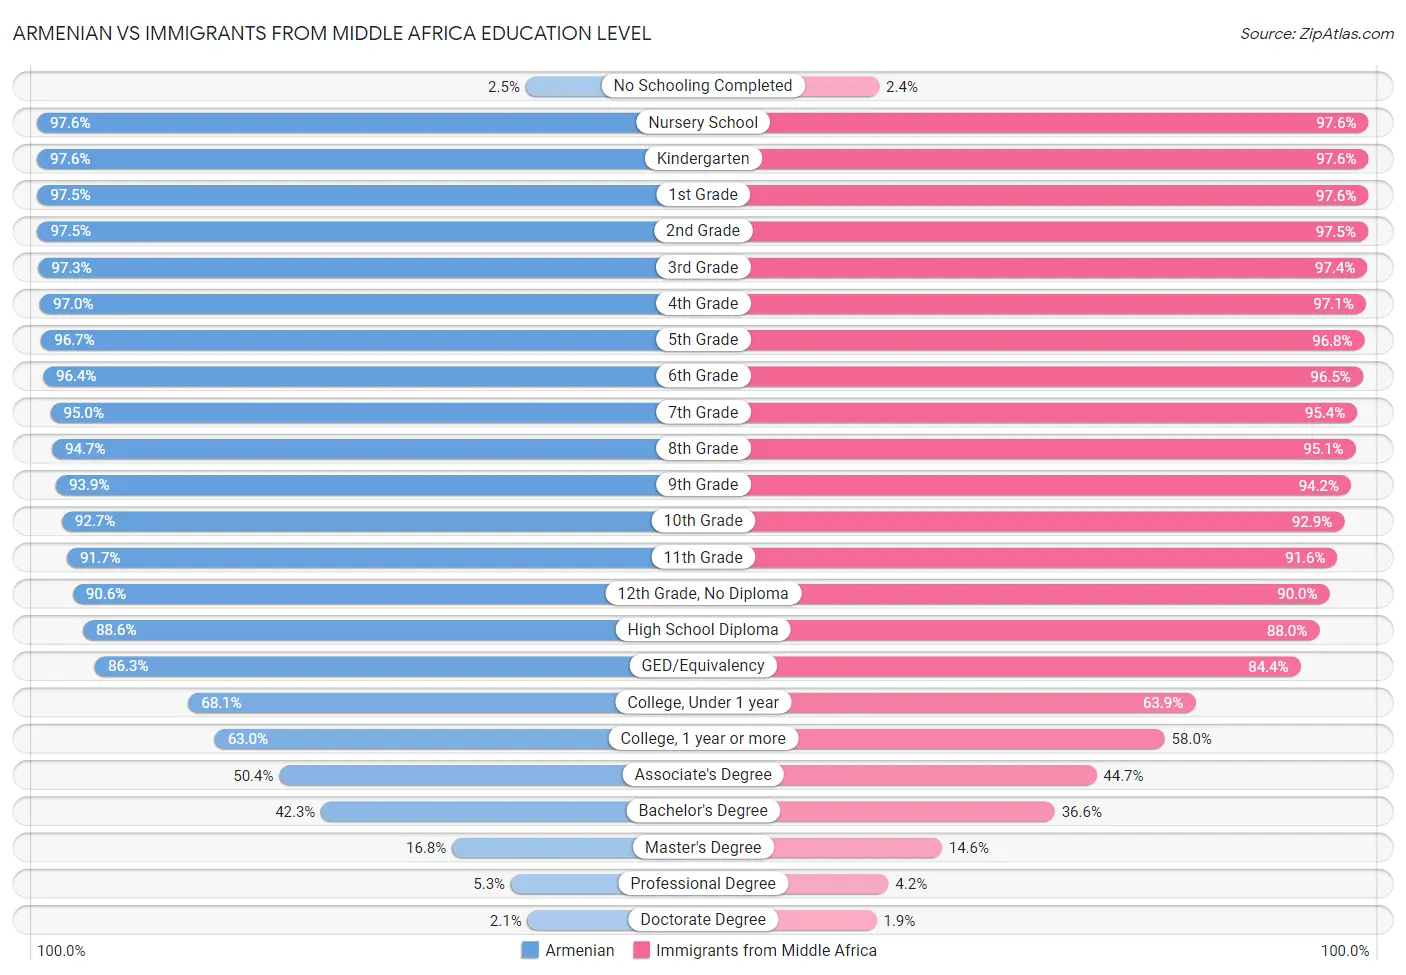 Armenian vs Immigrants from Middle Africa Education Level